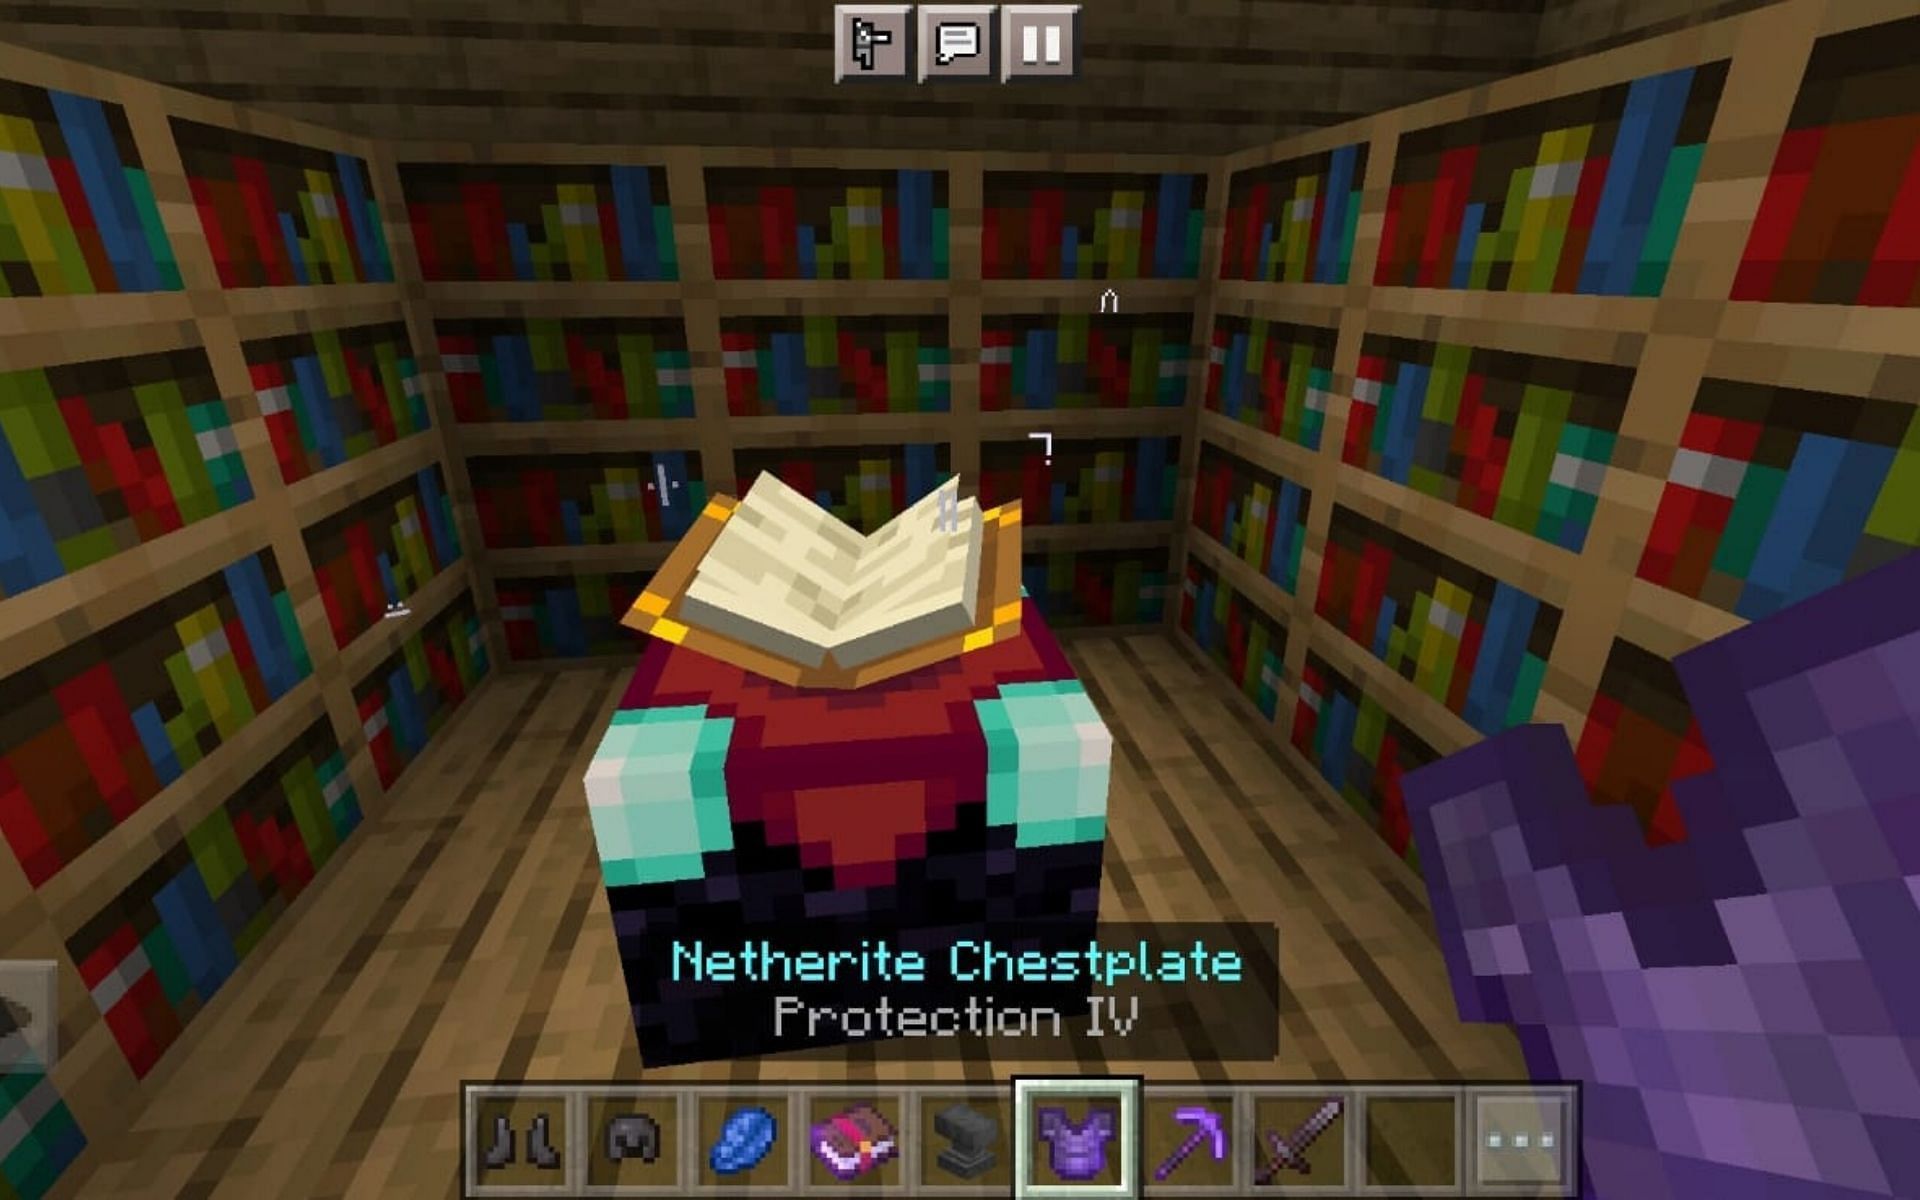 Protection enchantment on the armor decreases the damage taken by the player when attacked (Image via Minecraft)